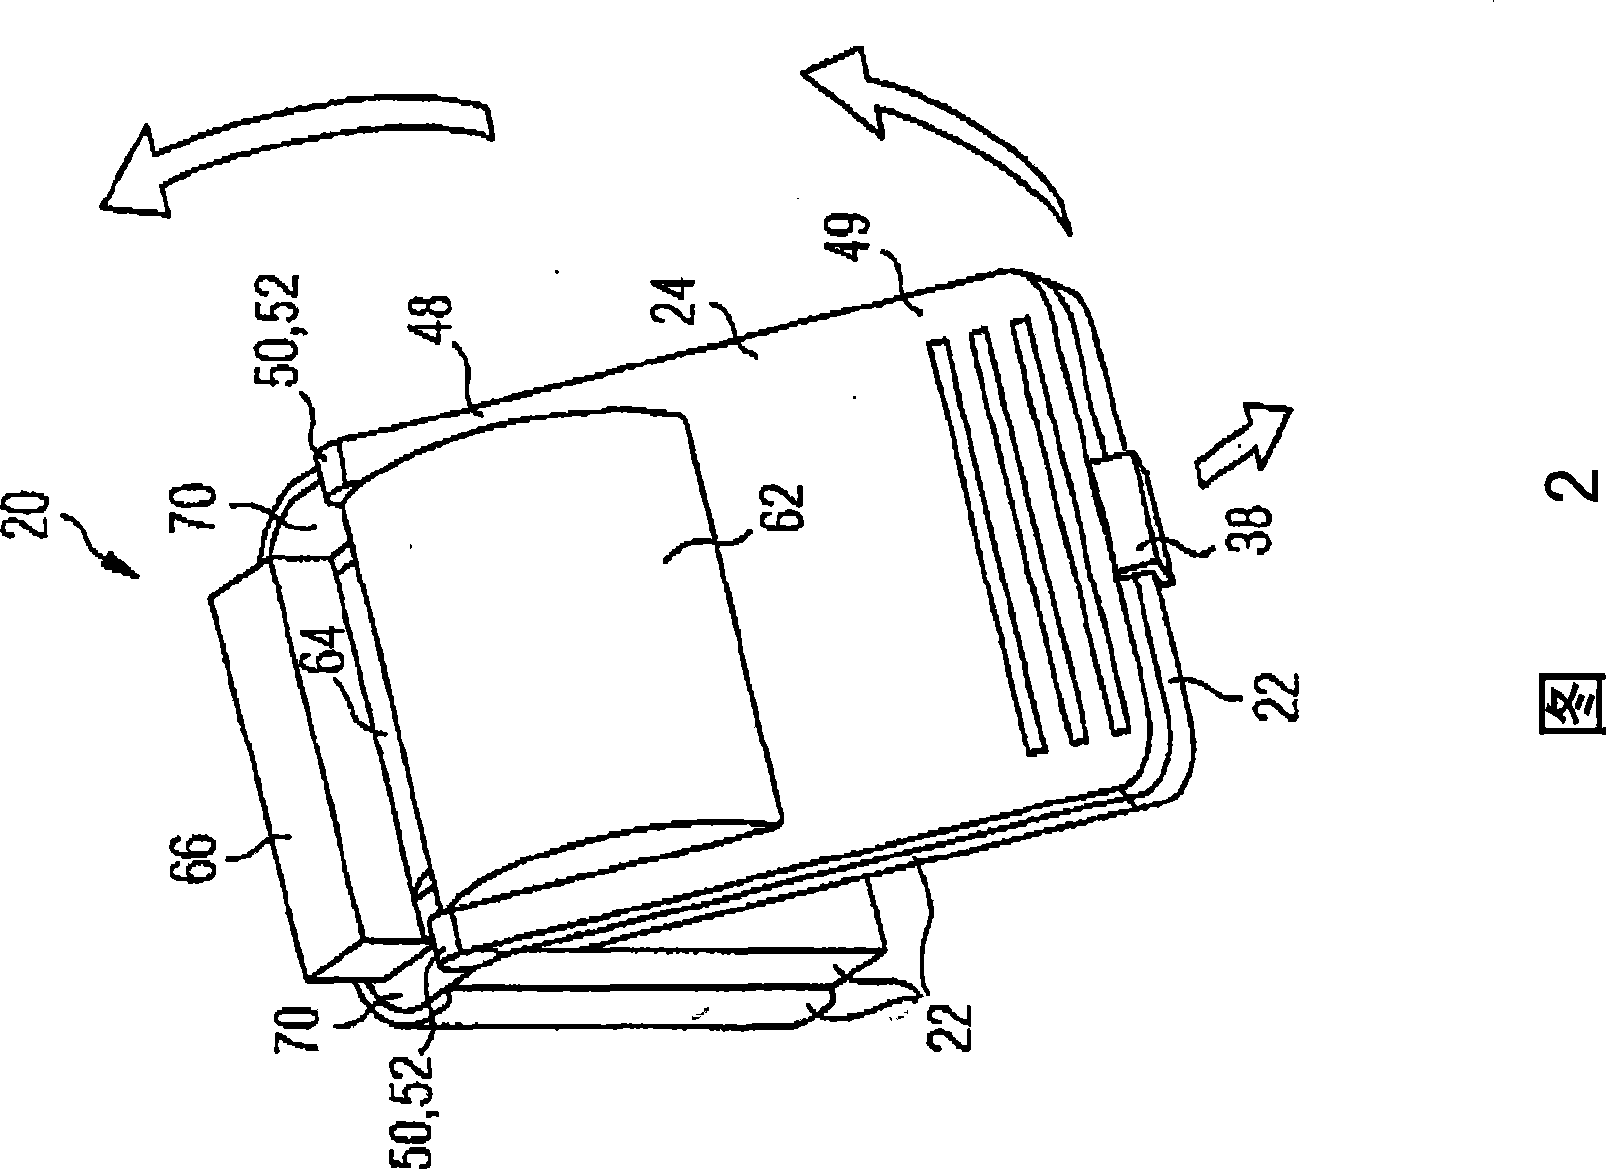 Splicer with rotatable splicing cassette carrier